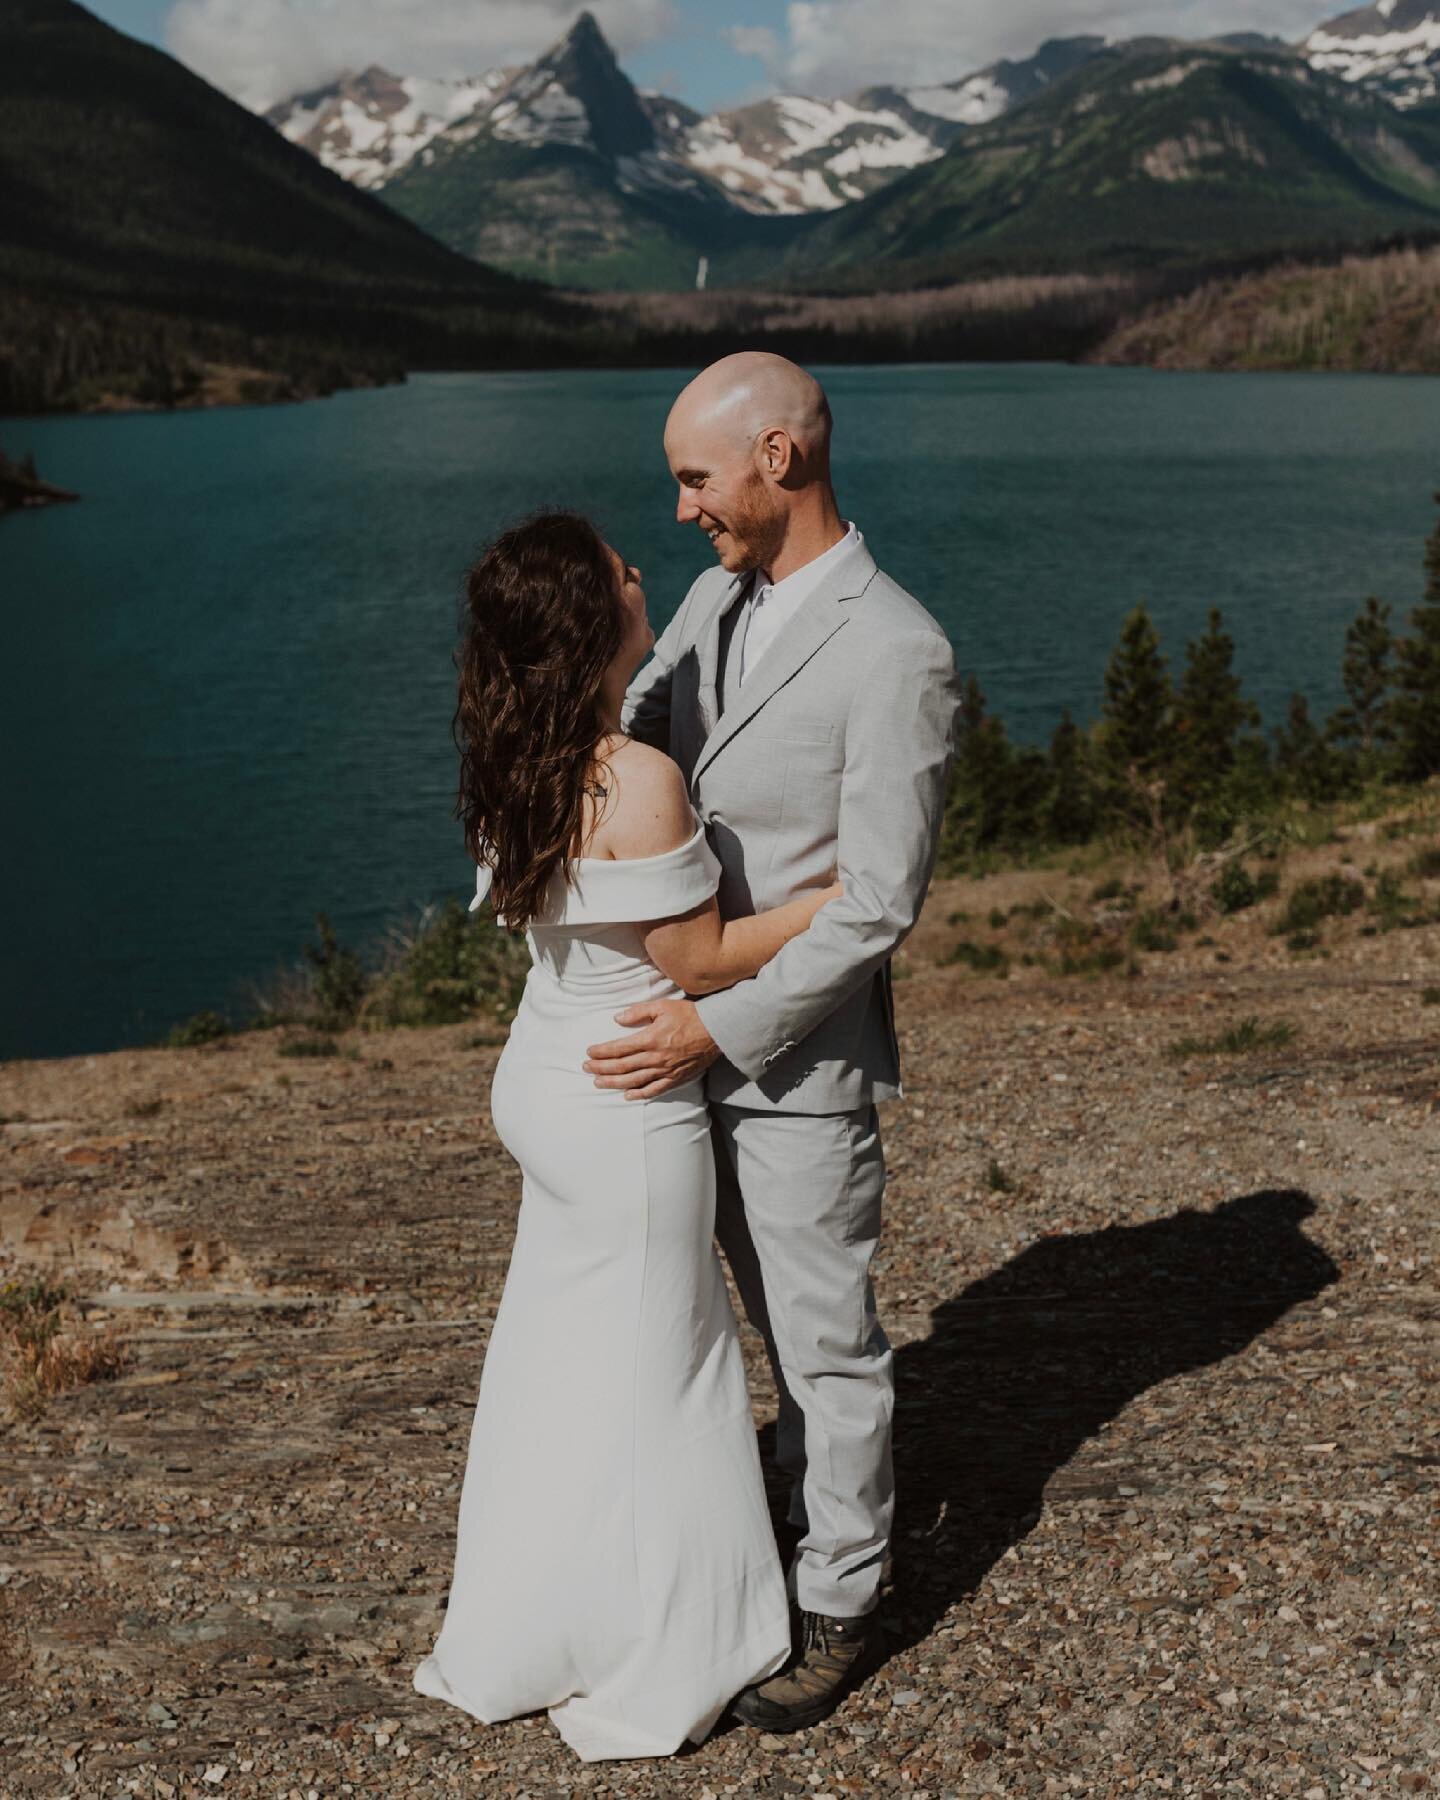 TEN TYPES OF ELOPEMENT ACTIVITIES THAT DON'T INVOLVE HIKING⁣
⁣
FUN FACT... did you know that you don&rsquo;t have to hike for your elopement day?⁣
⁣
Eloping is completely customizable to YOU and how you want to do it! Even the majority of elopement c